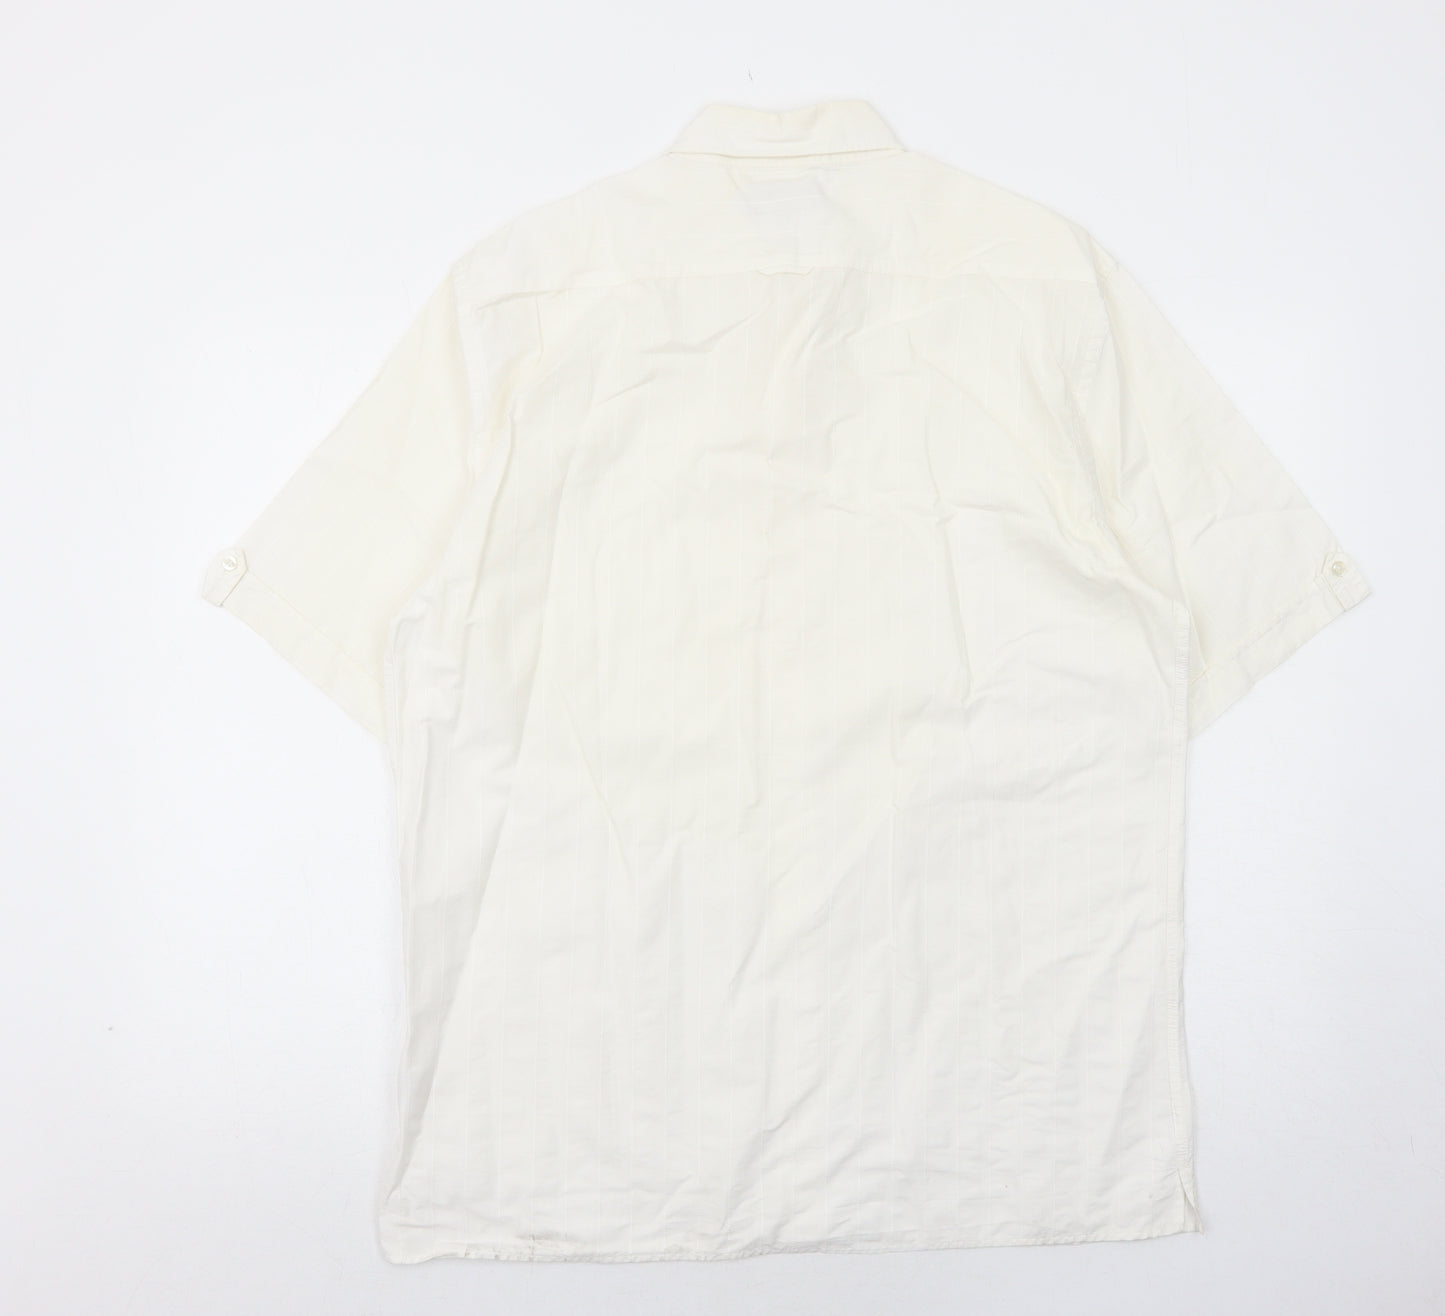 NEXT Mens Ivory Cotton Button-Up Size L Collared Button